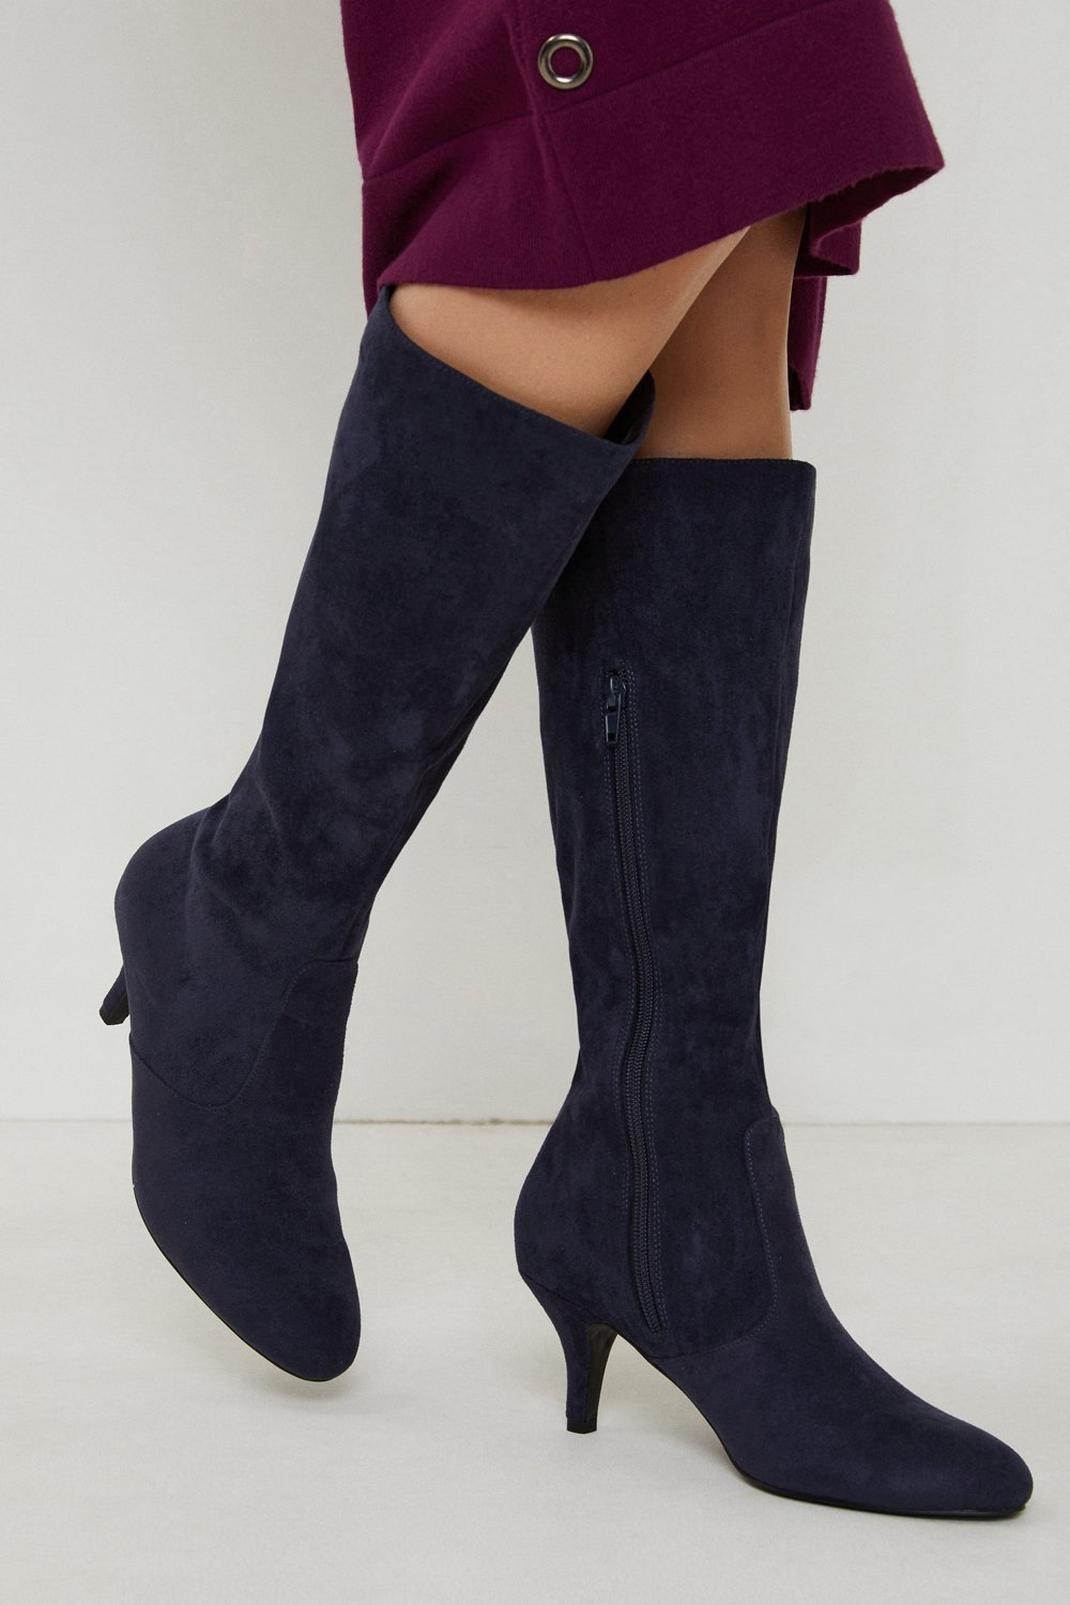 Navy Kinsley Stretch Low Stiletto Heel Knee High Boots image number 1